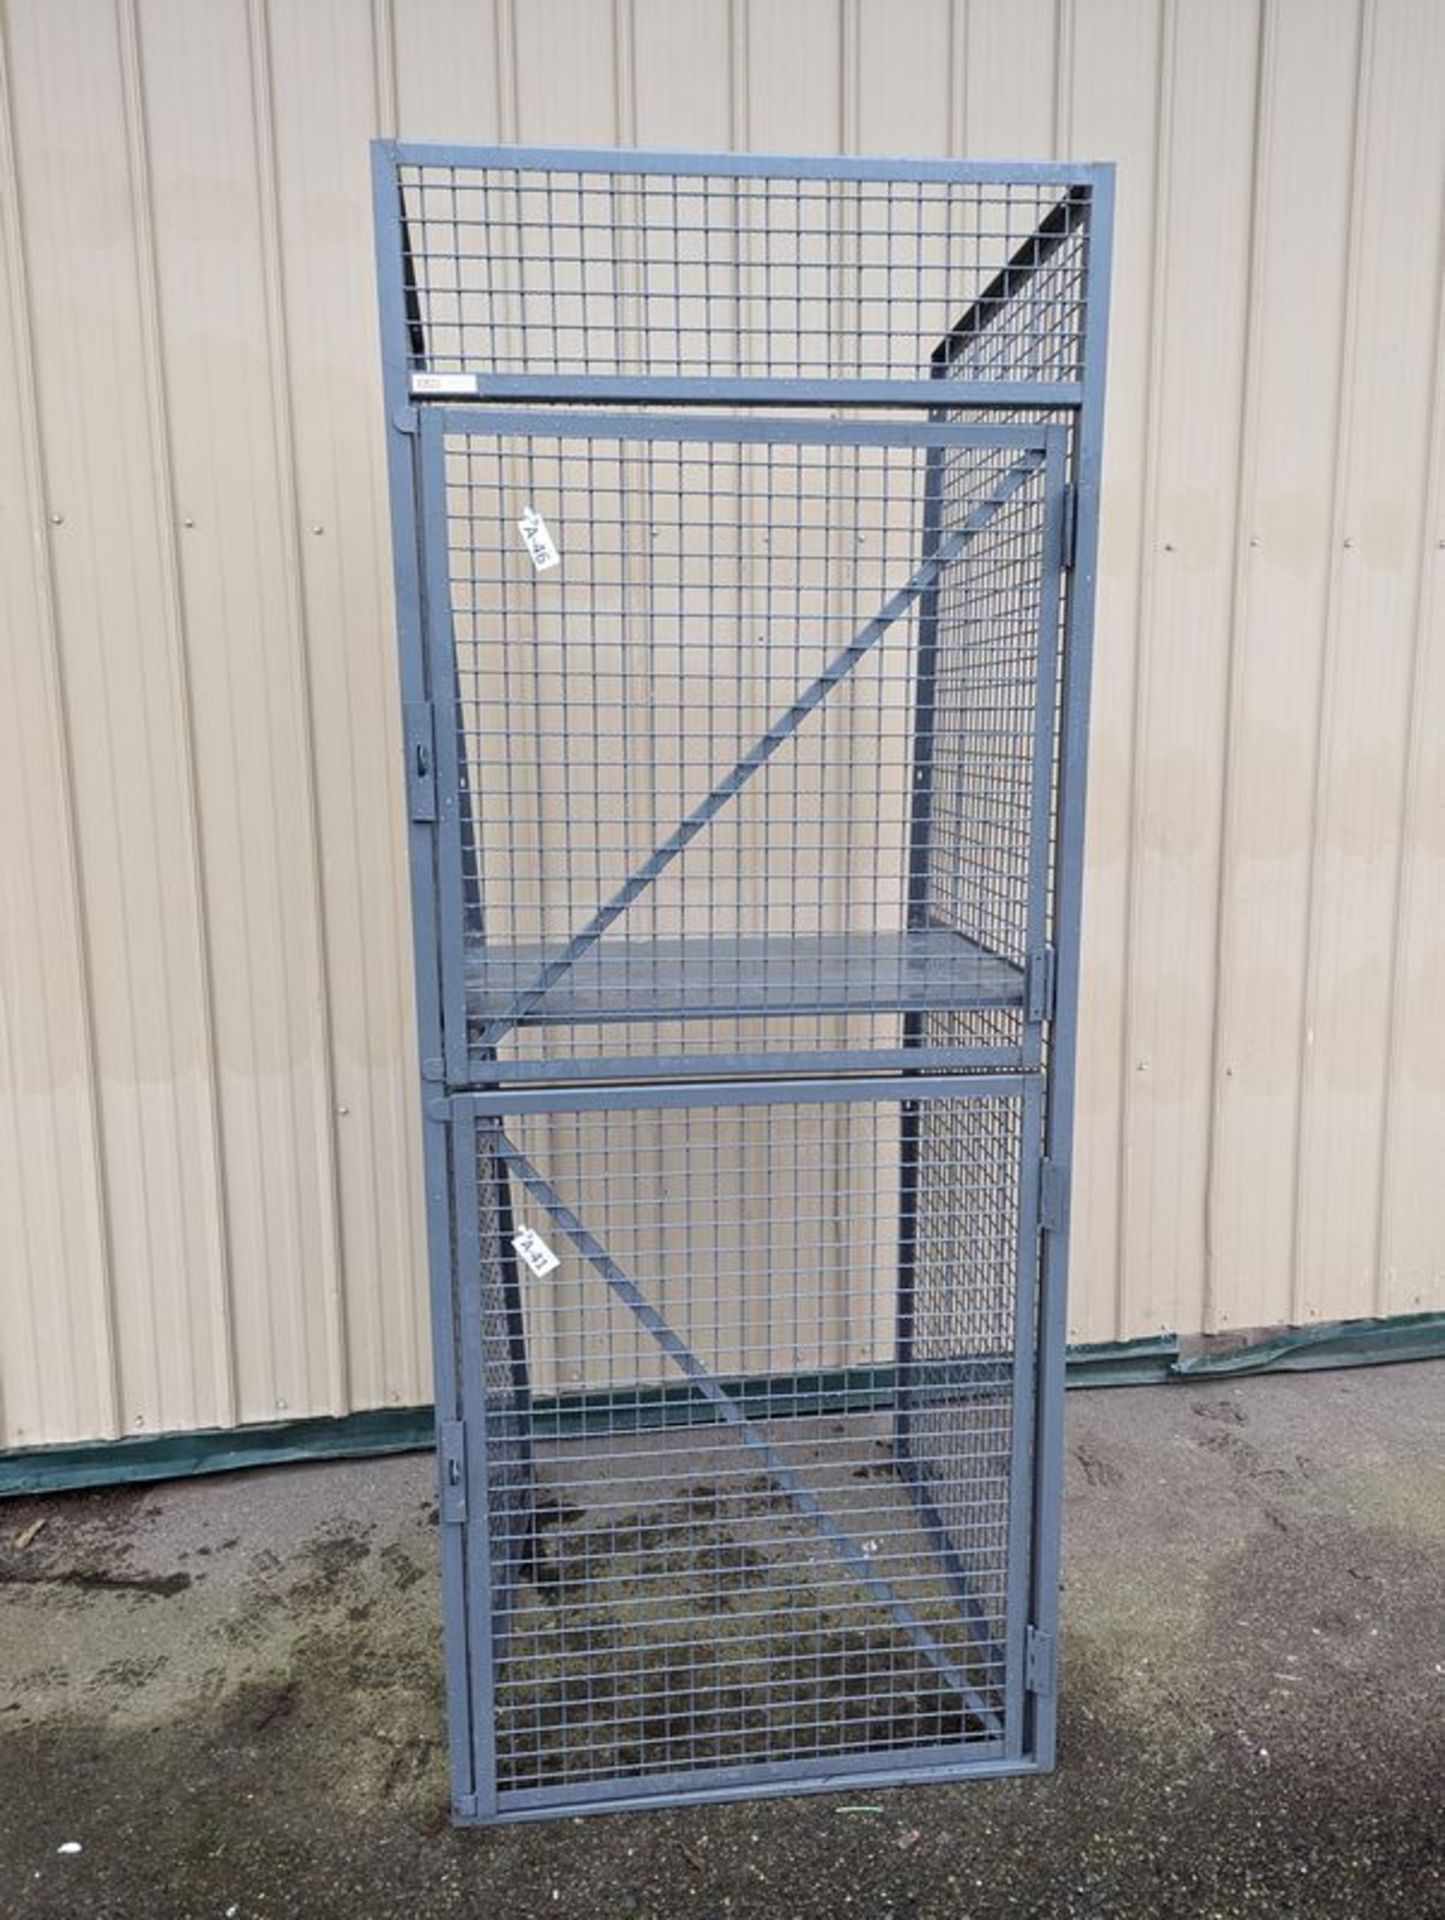 Six, Uline, 36 x 36" Two Tier, 3 Sided, Storage Cages, Used 1 Year. Original Cost $760 per unit